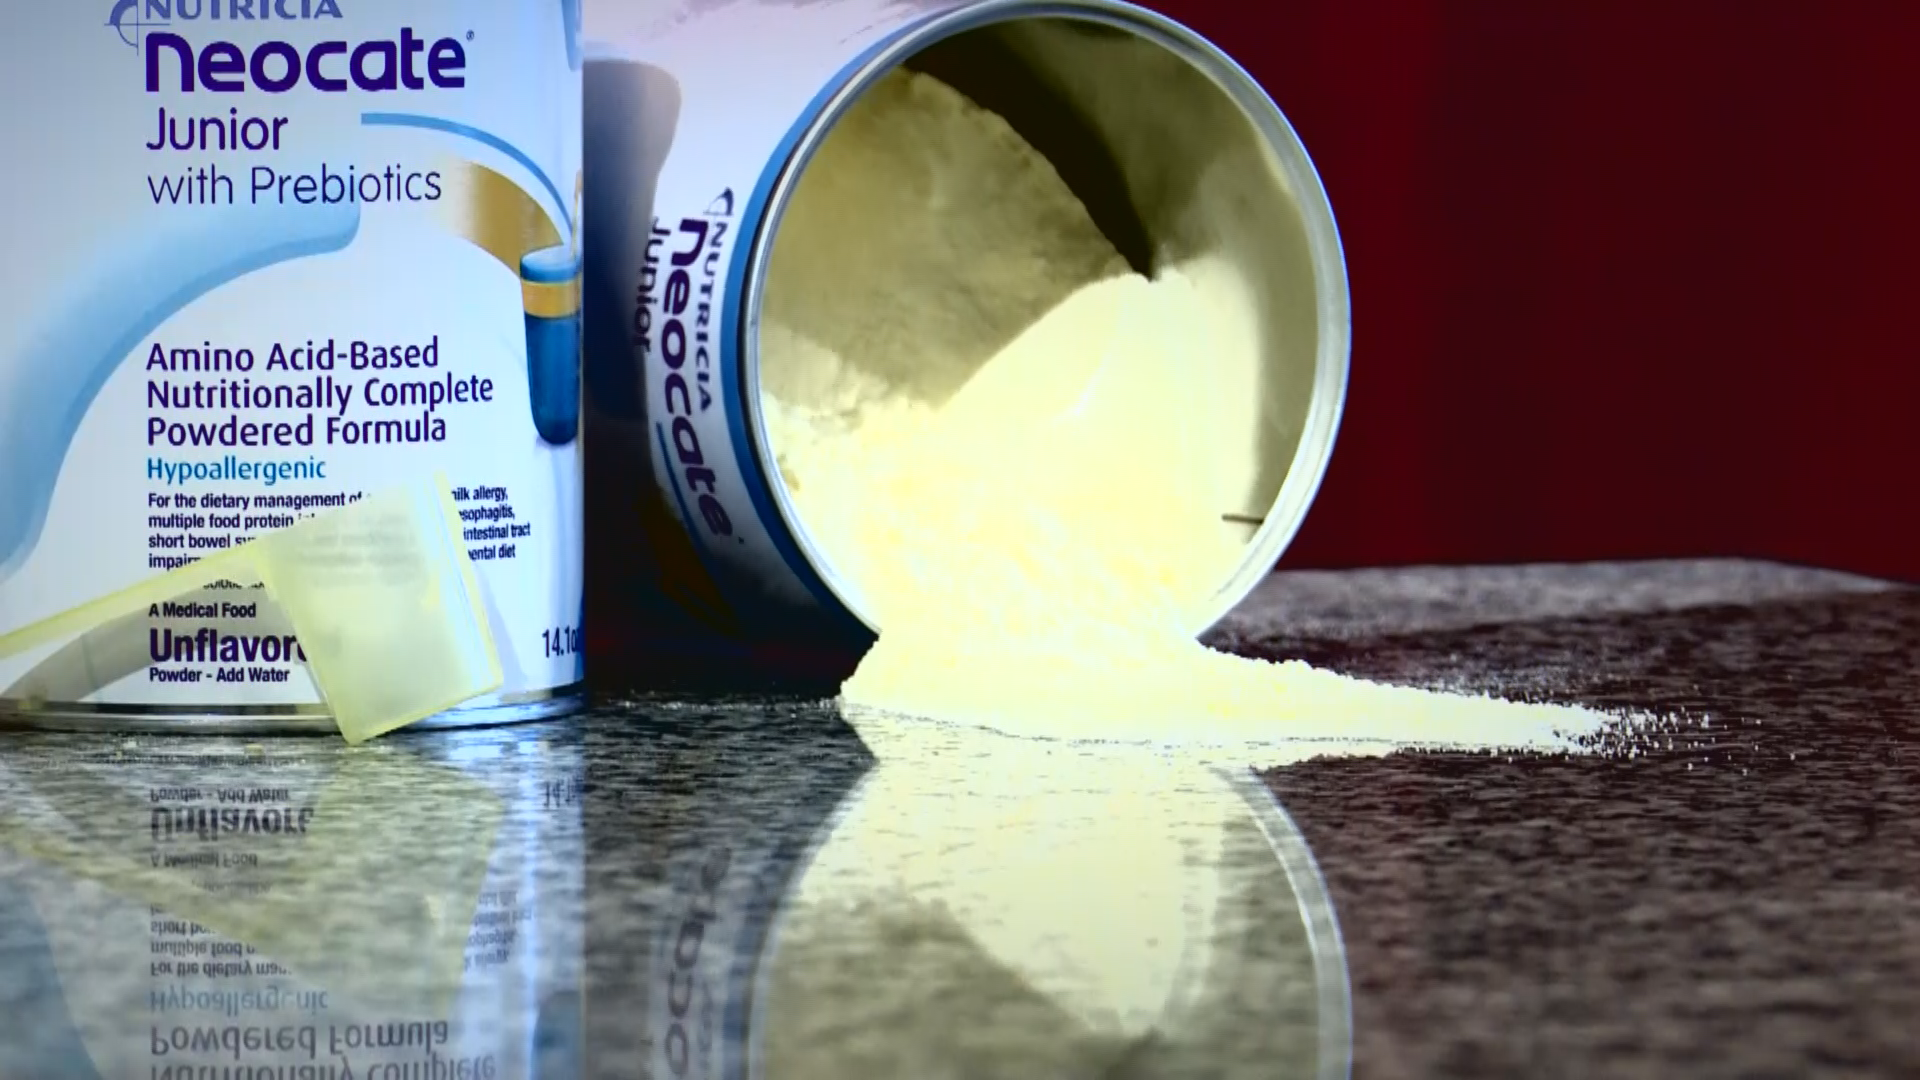 Military healthcare paying more than $400 for a $46 can of baby formula